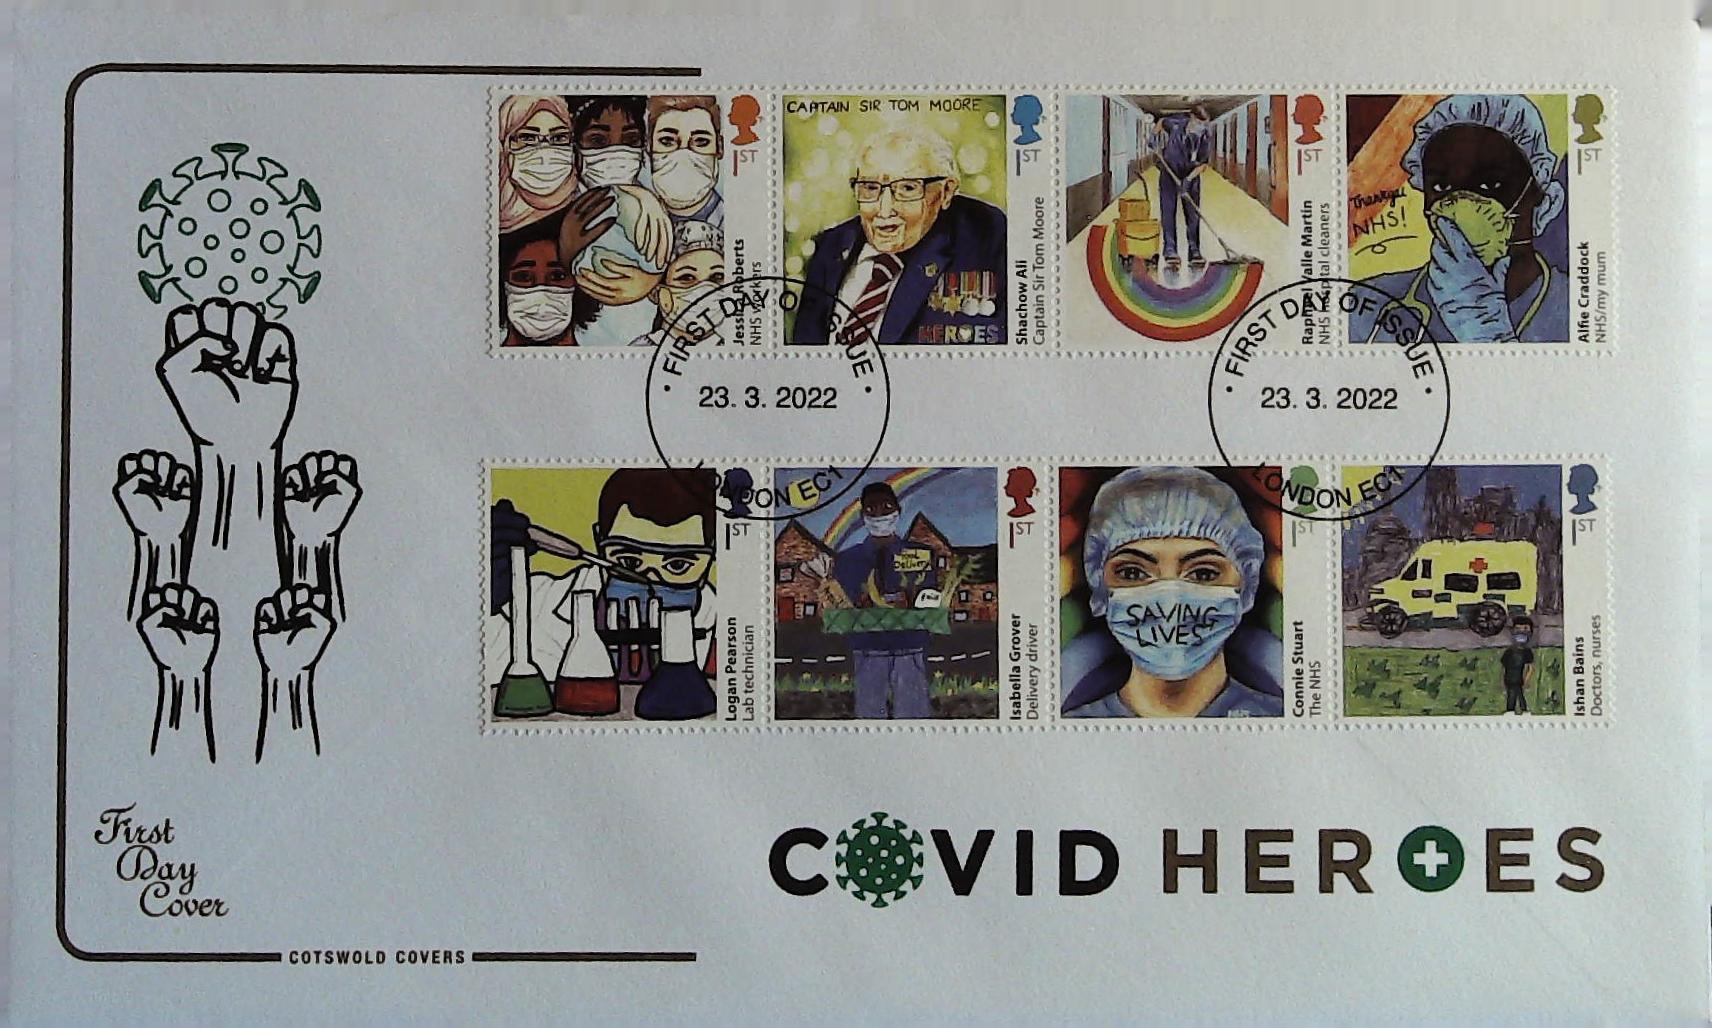 2022 COVID HEROES - COTSWOLD FDC -FIRST DAY OF ISSUE LONDON EC1 NON PICTORIAL POSTMARK